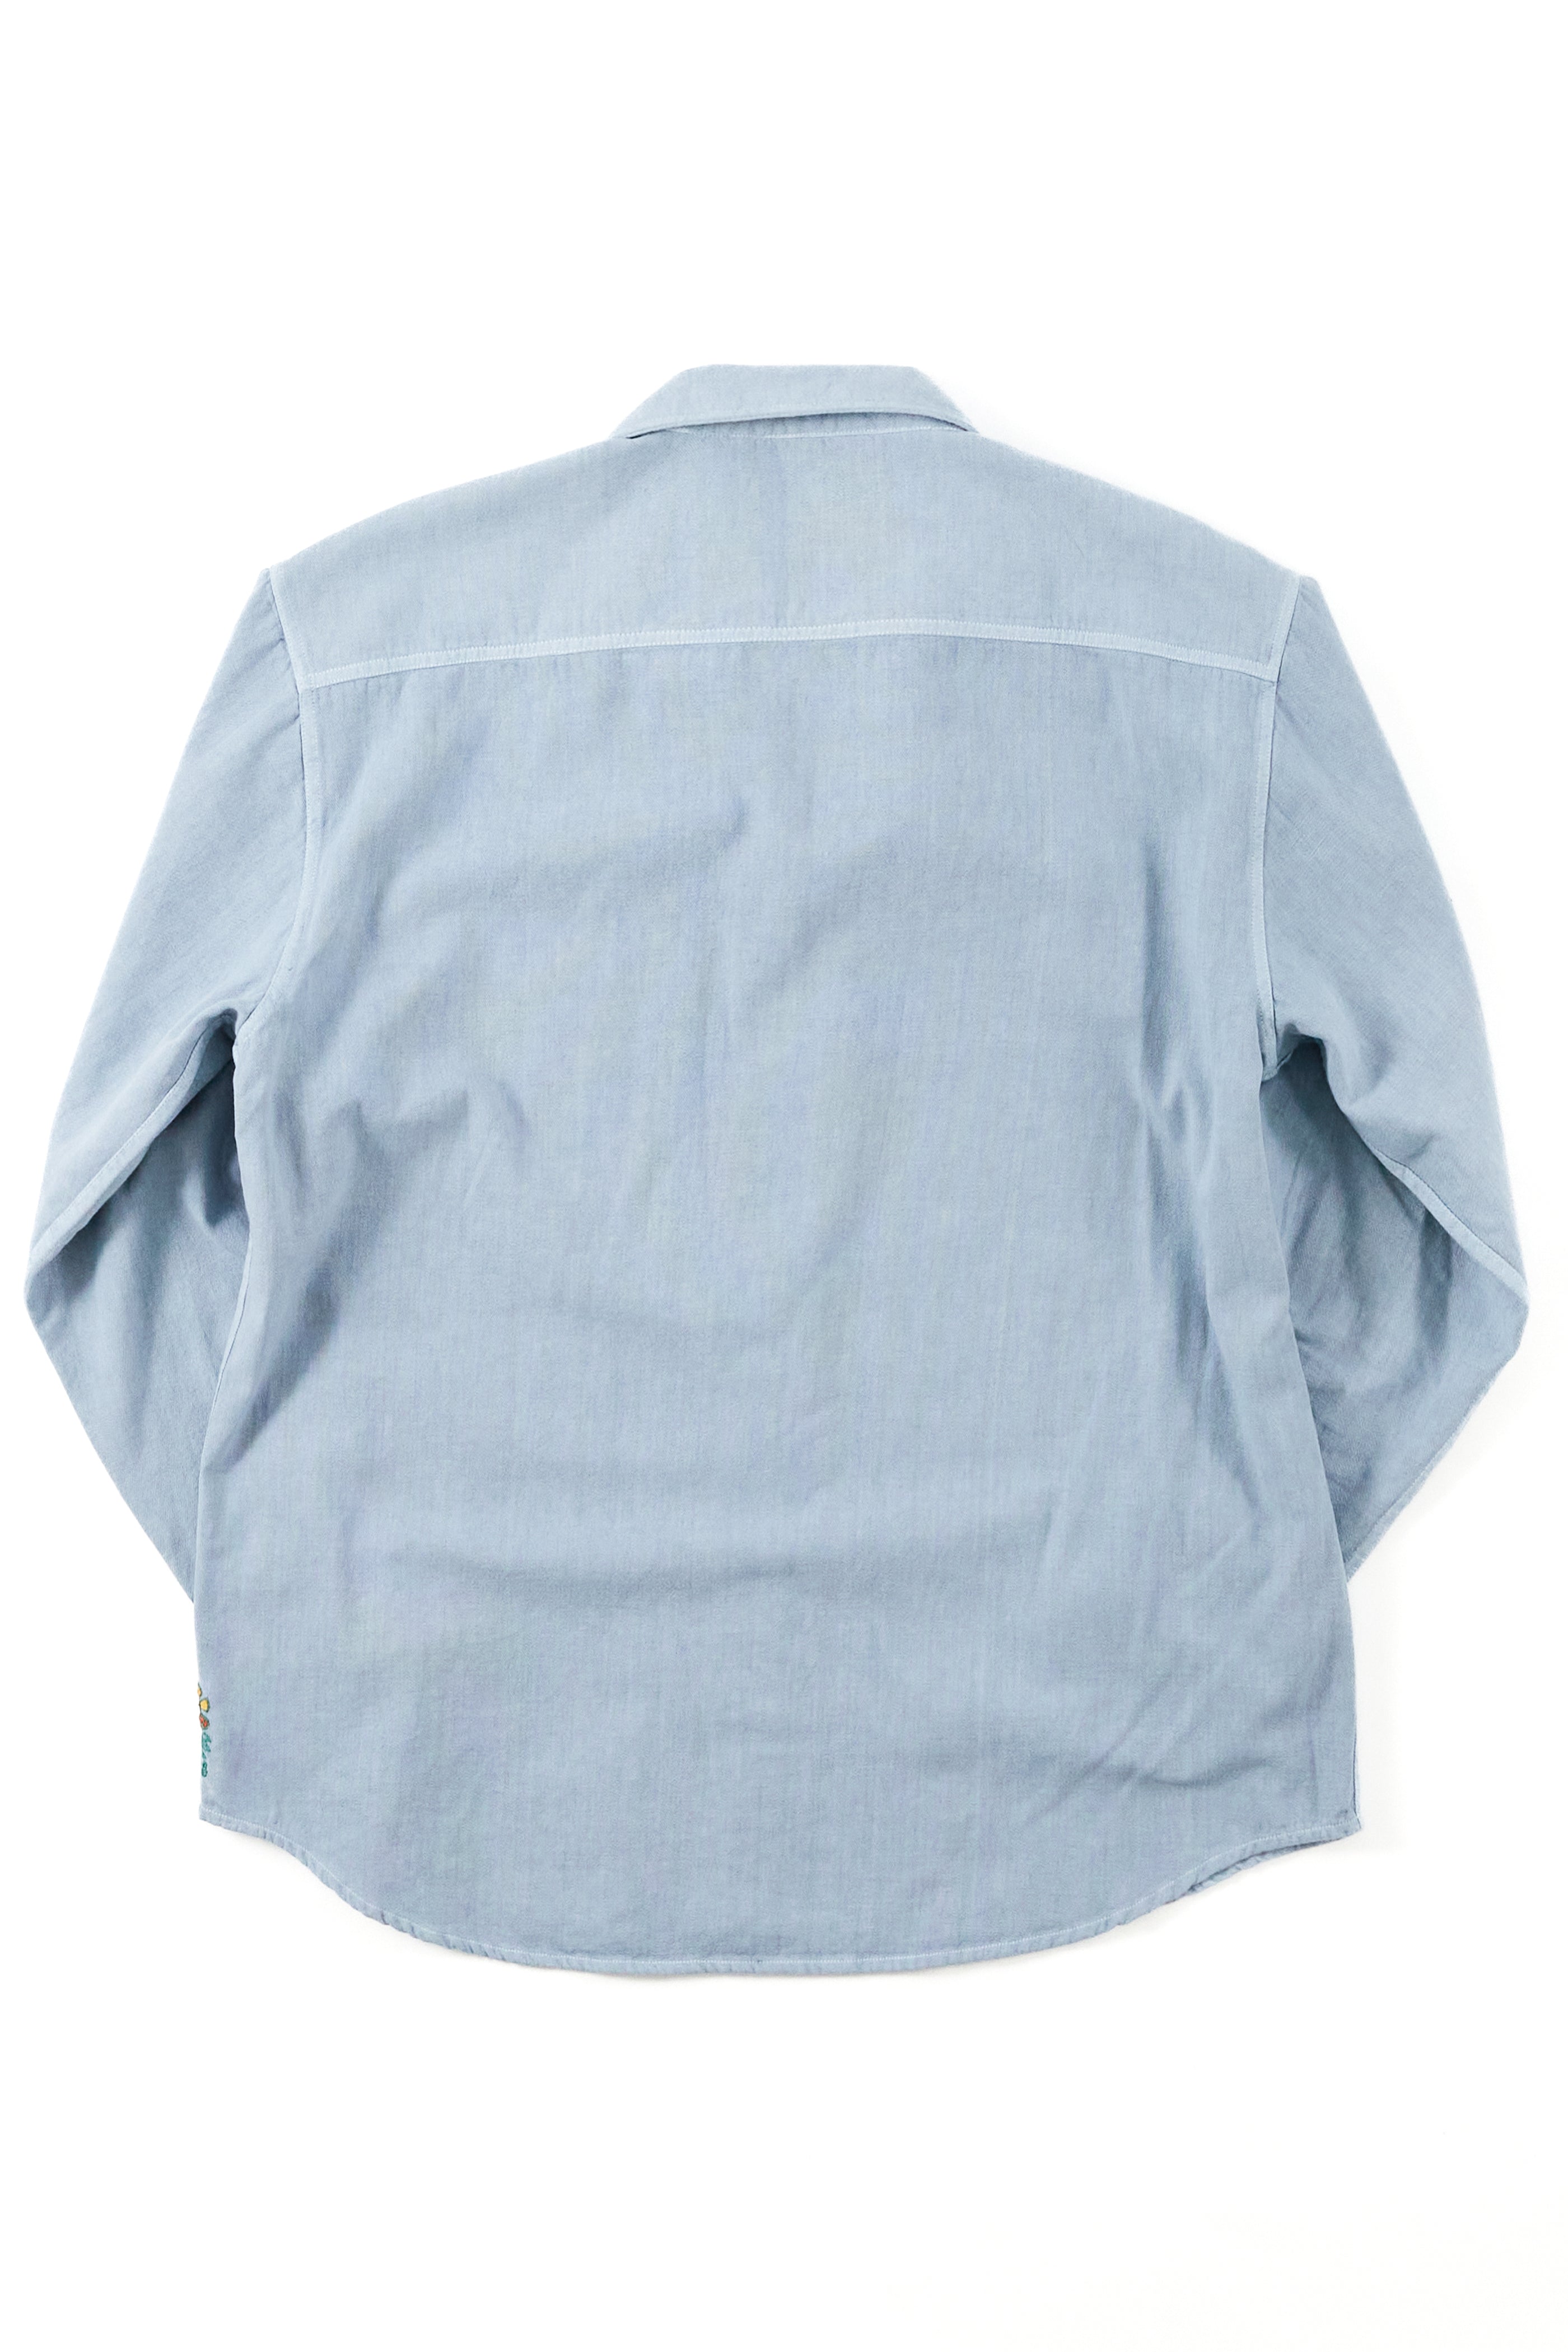 WOLF BUTTON-DOWN SHIRT - BLUE FOG PIGMENT DYED OXFORD